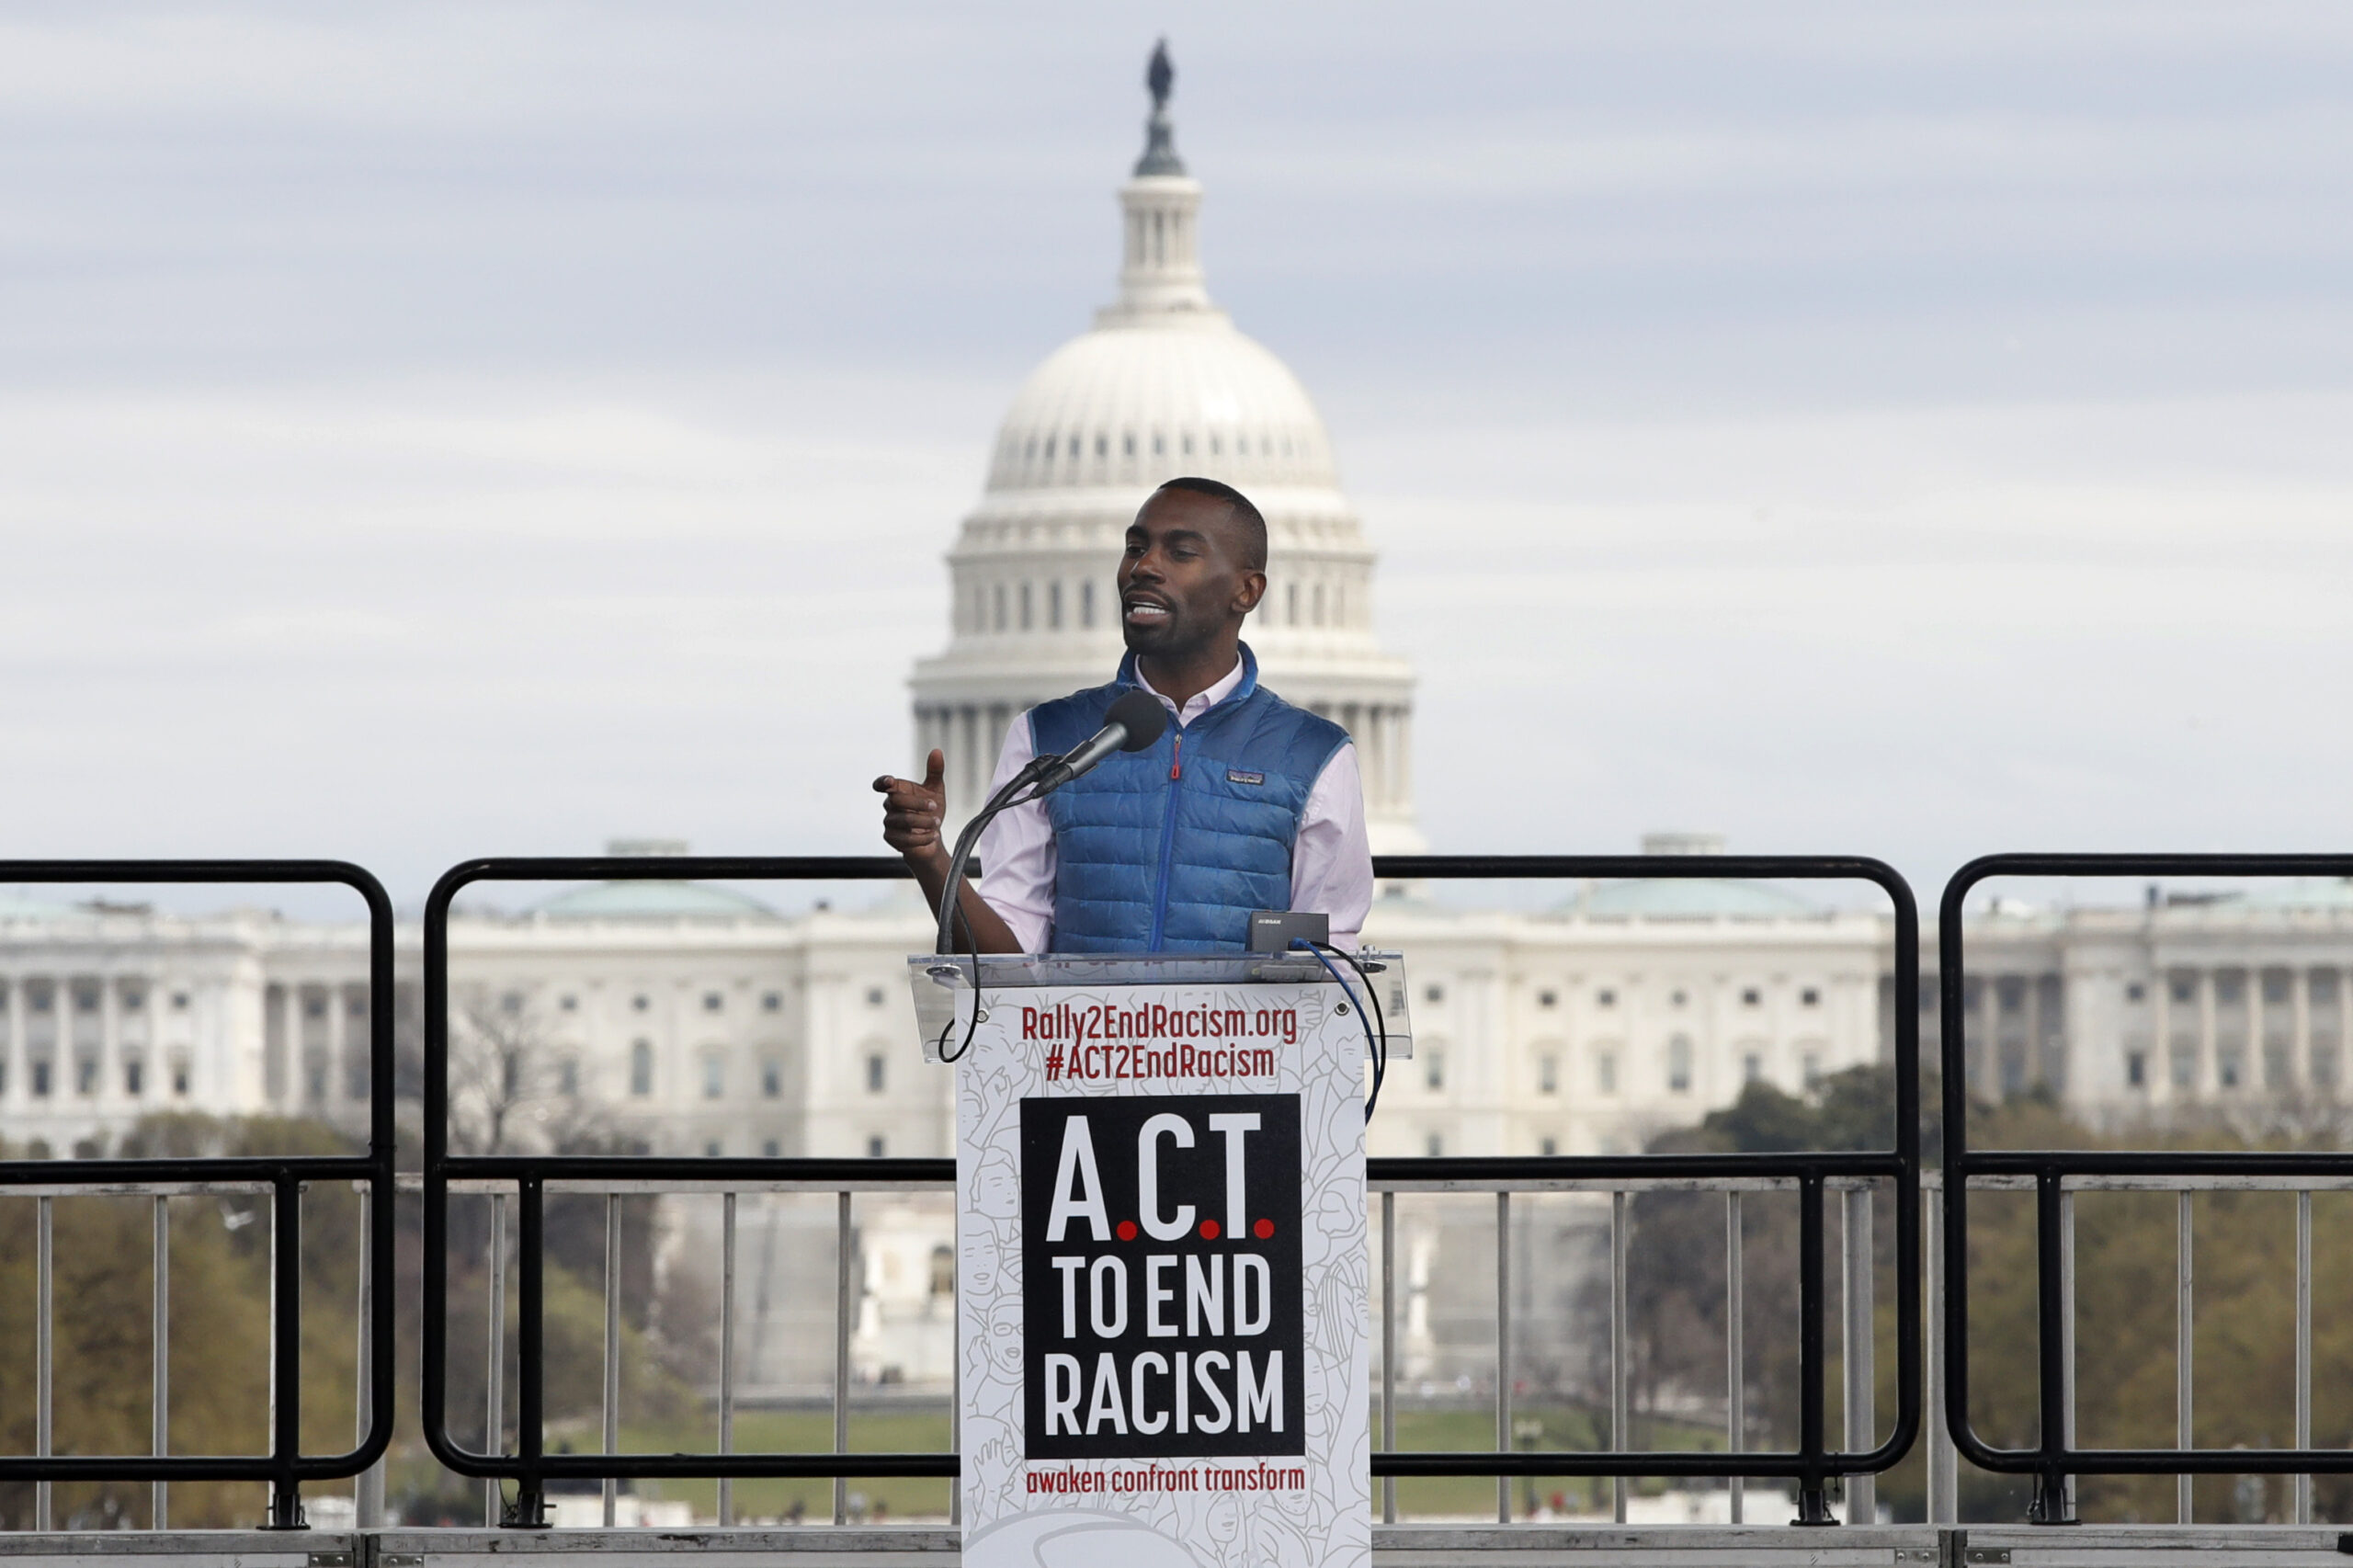 Activist DeRay Mckesson On How Hoping For Change Requires Taking Small First Steps